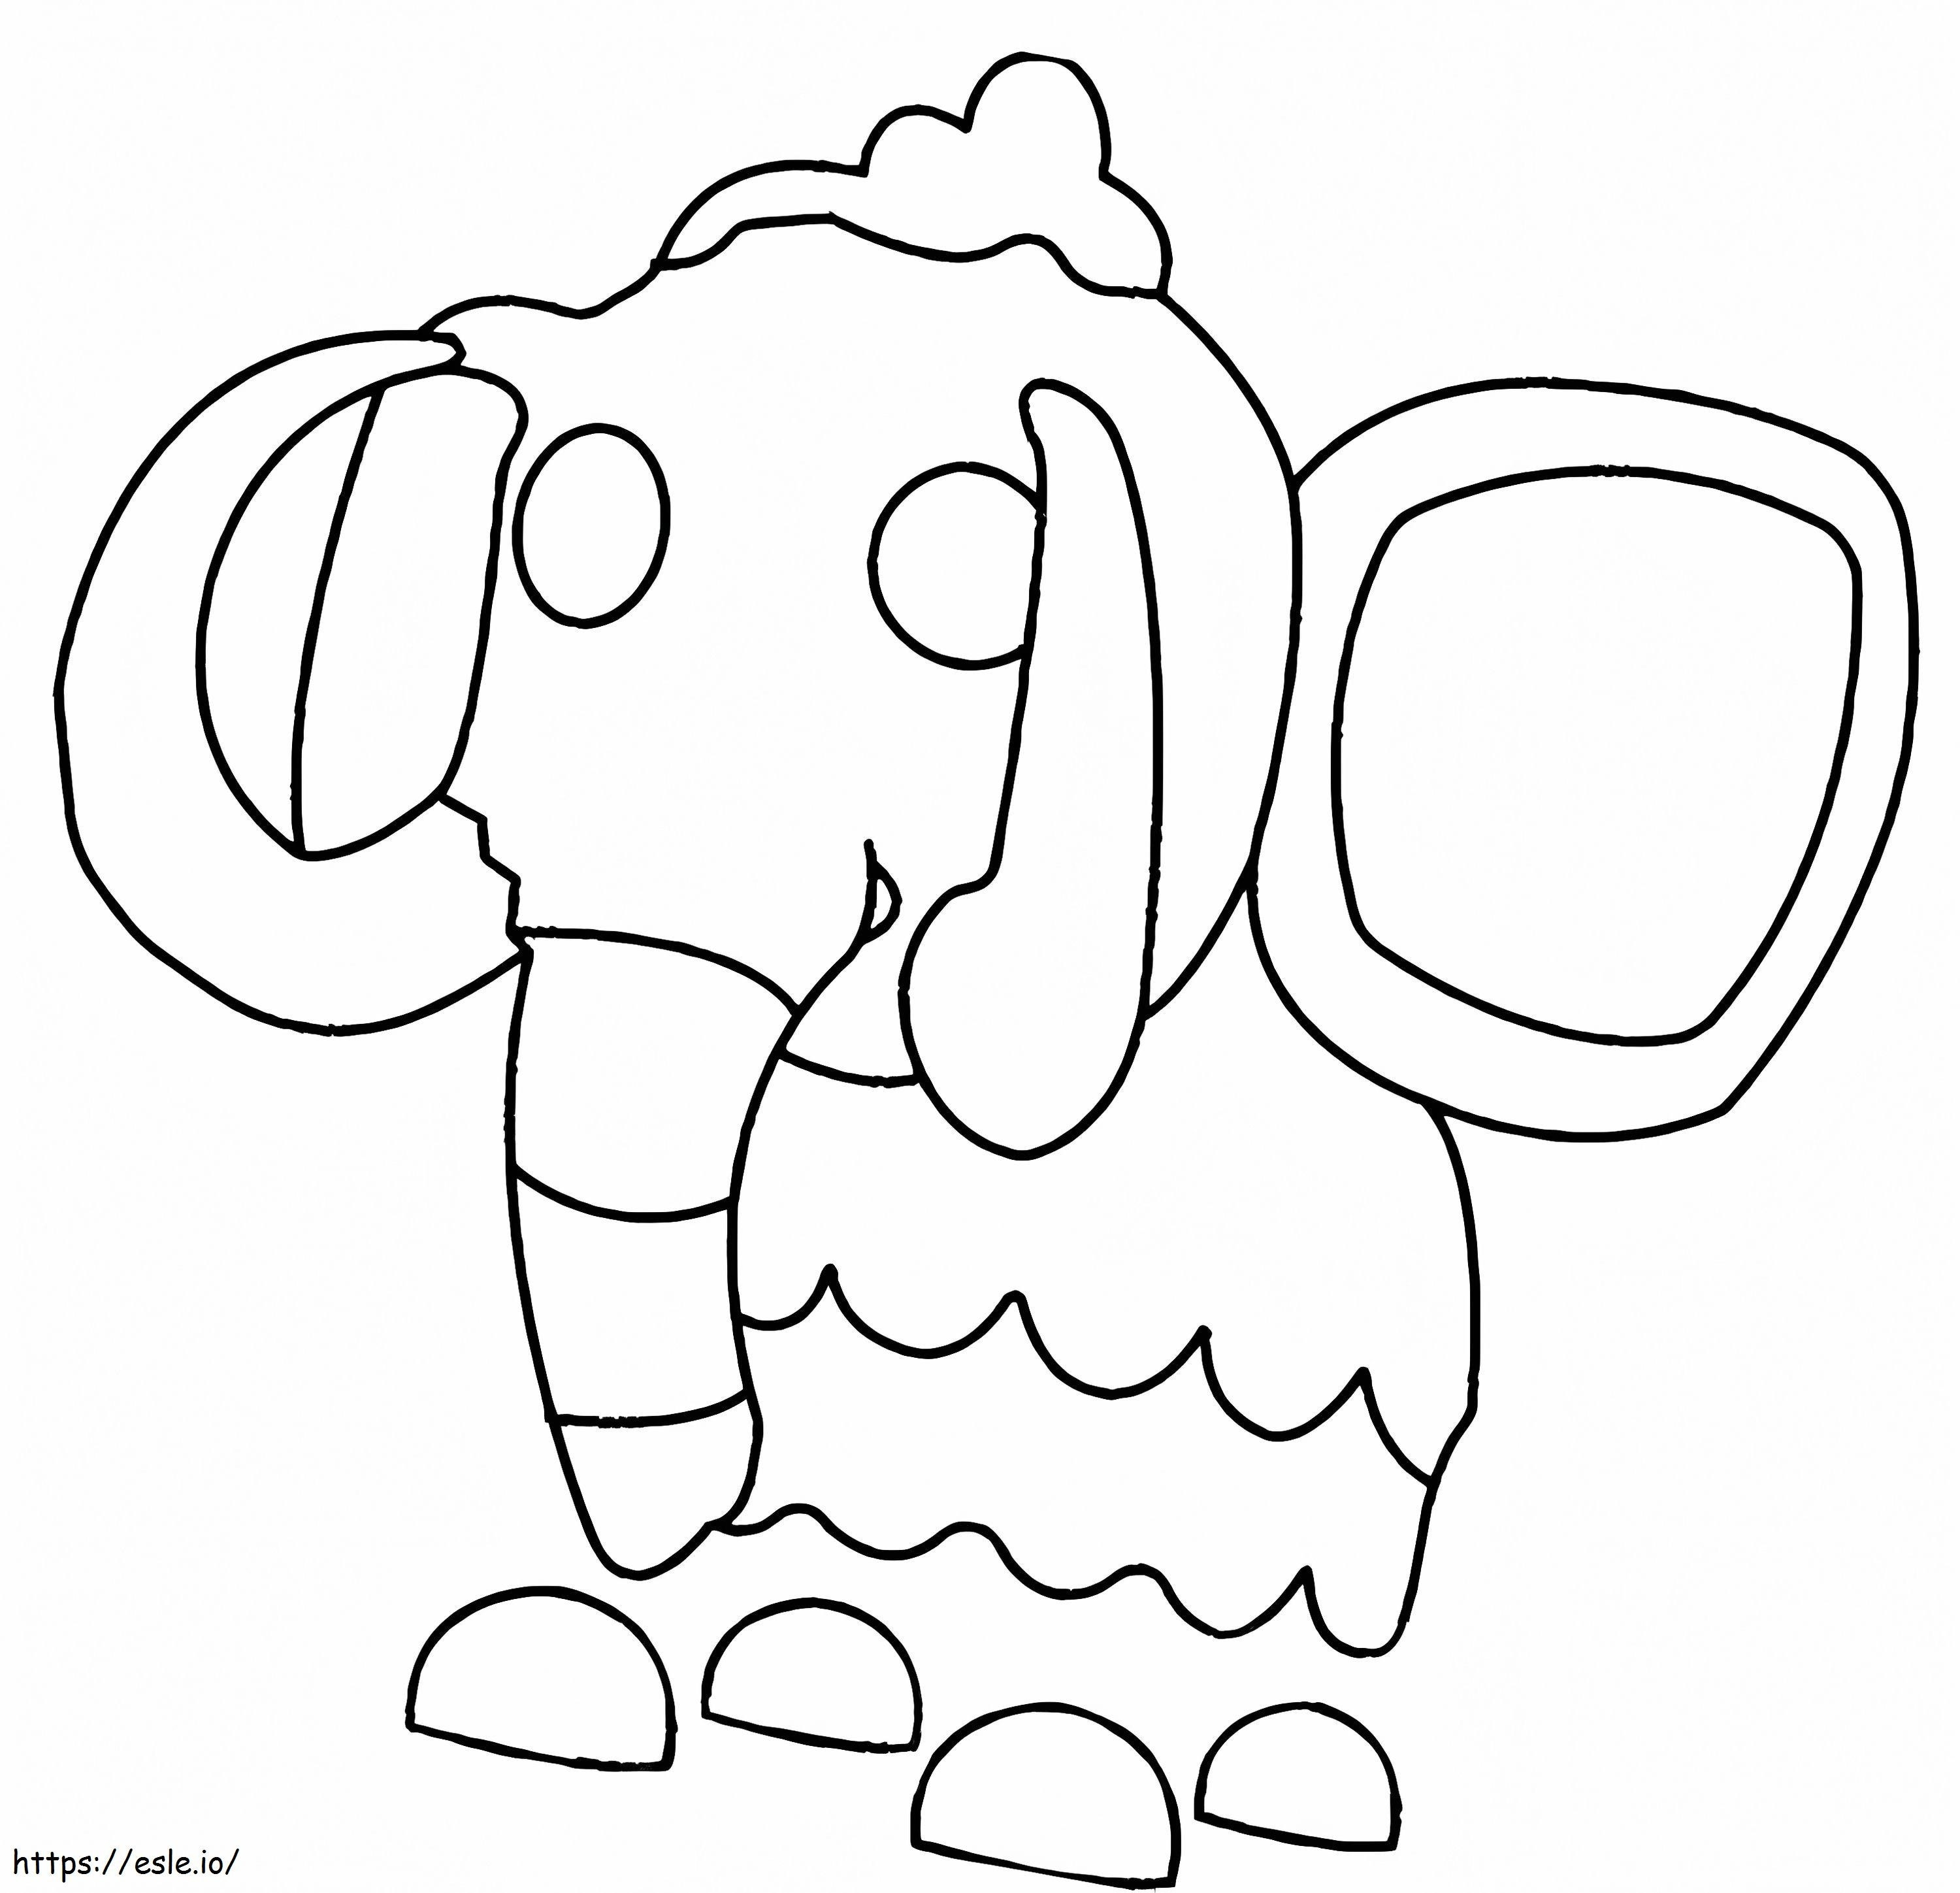 Wooly Mammoth Adopt Me coloring page